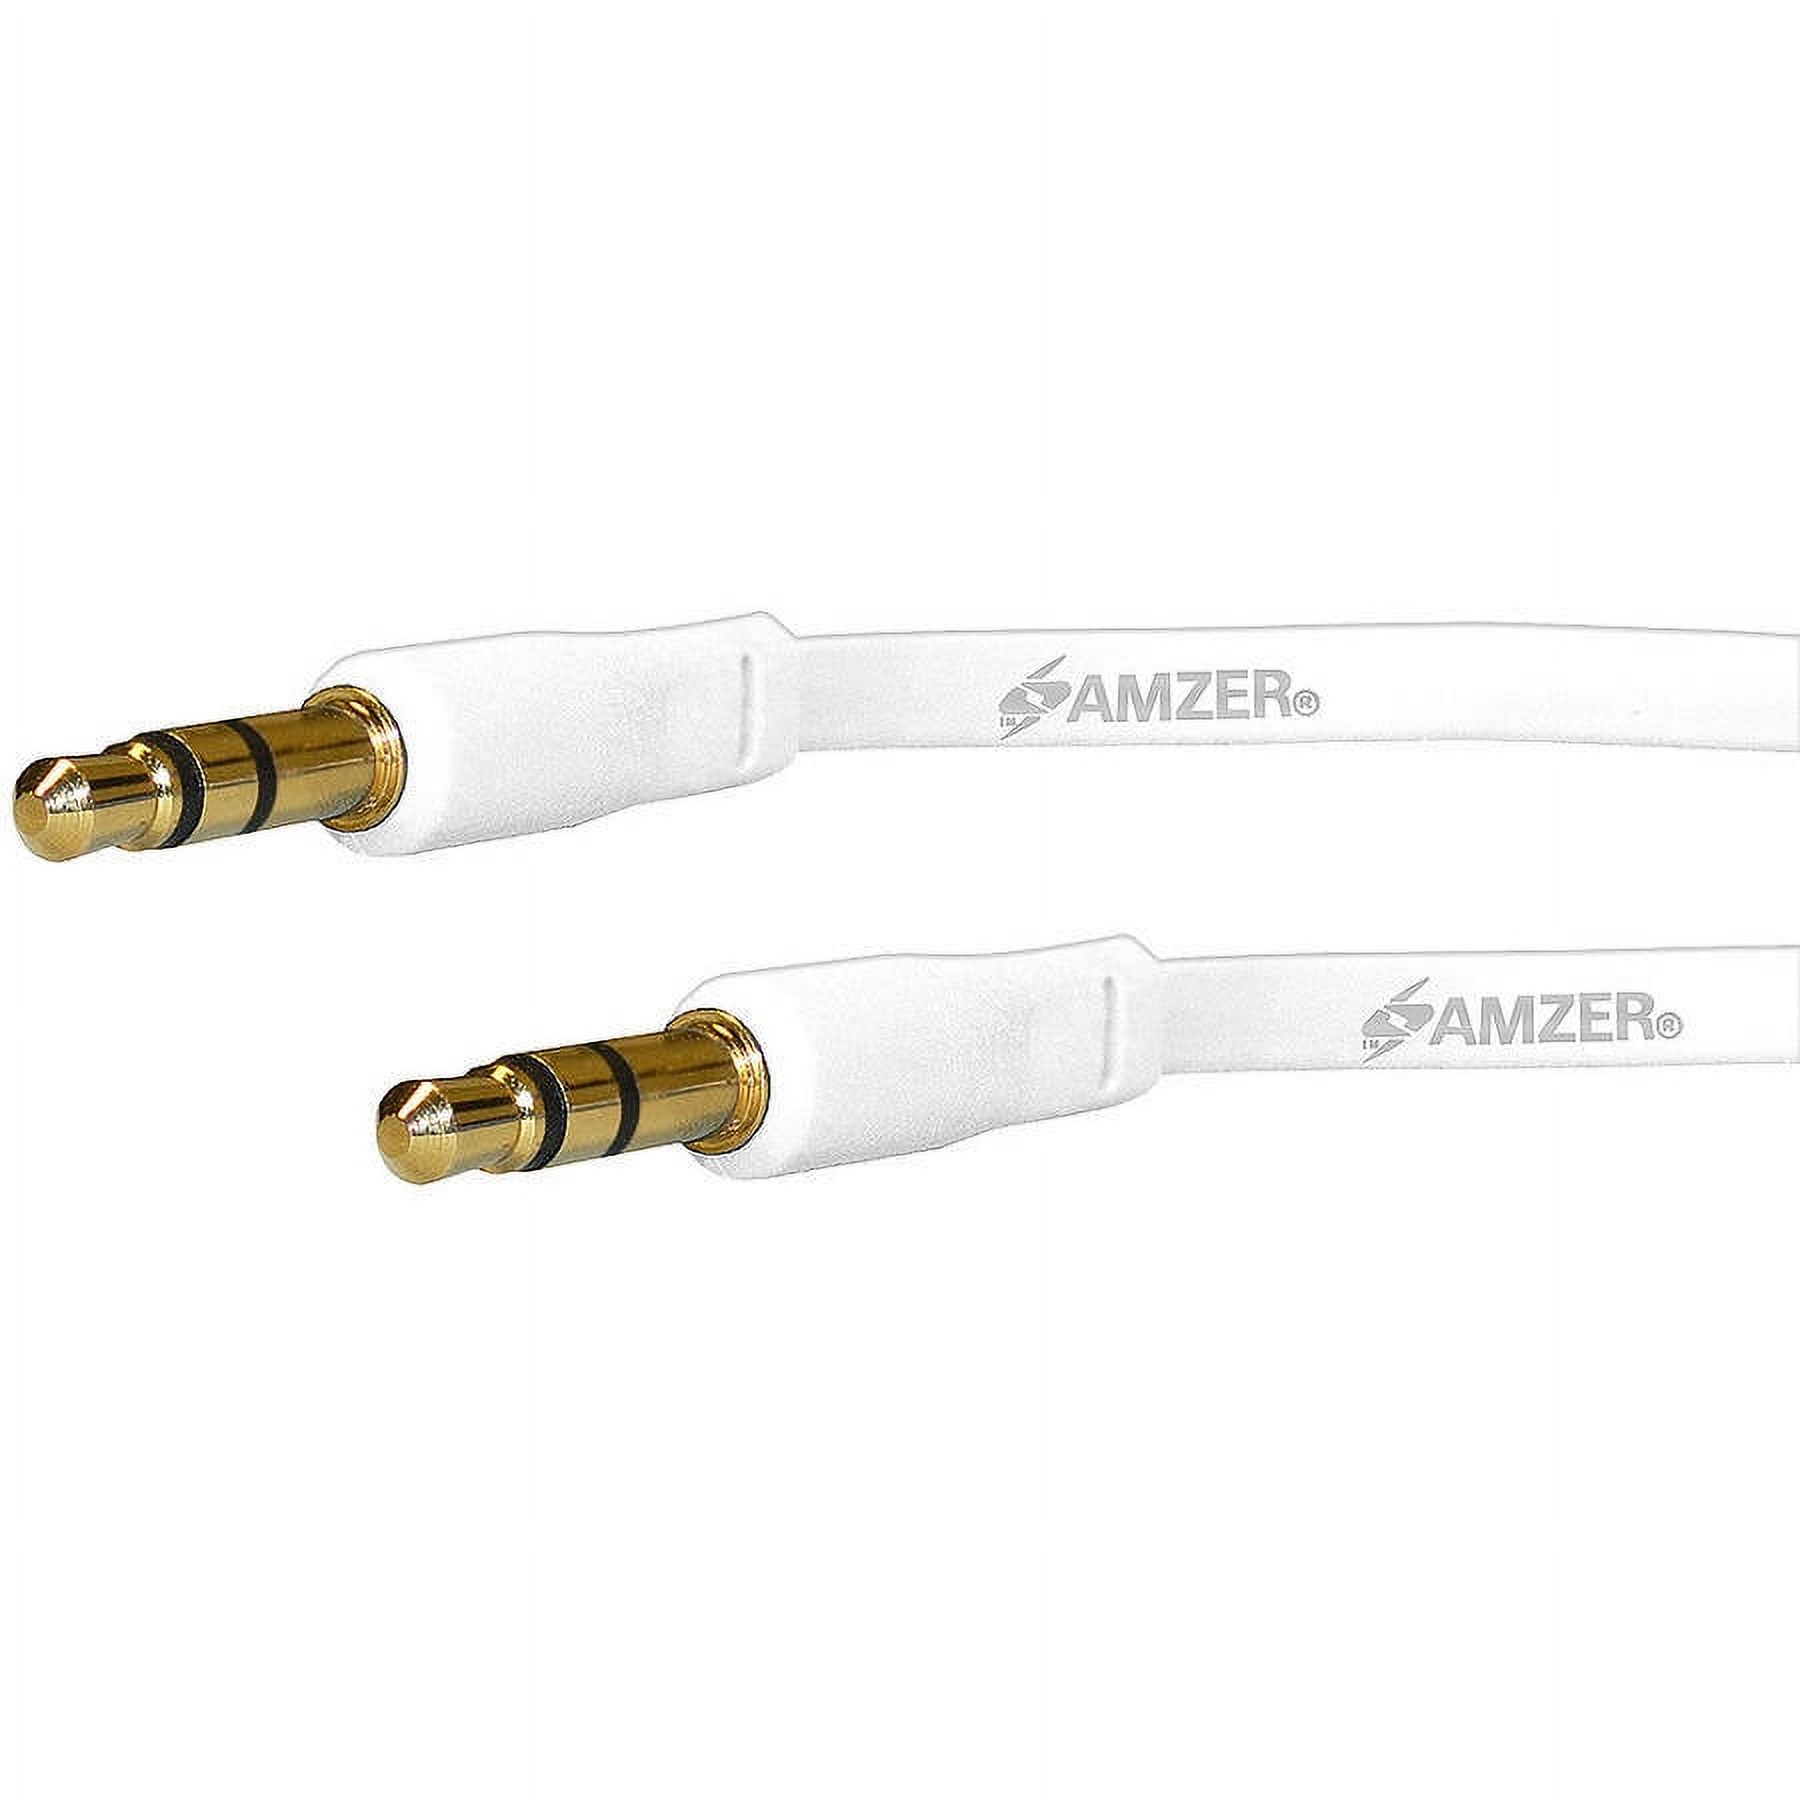 AMZER 3.5mm Auxiliary Audio Cable, 3' - image 2 of 2